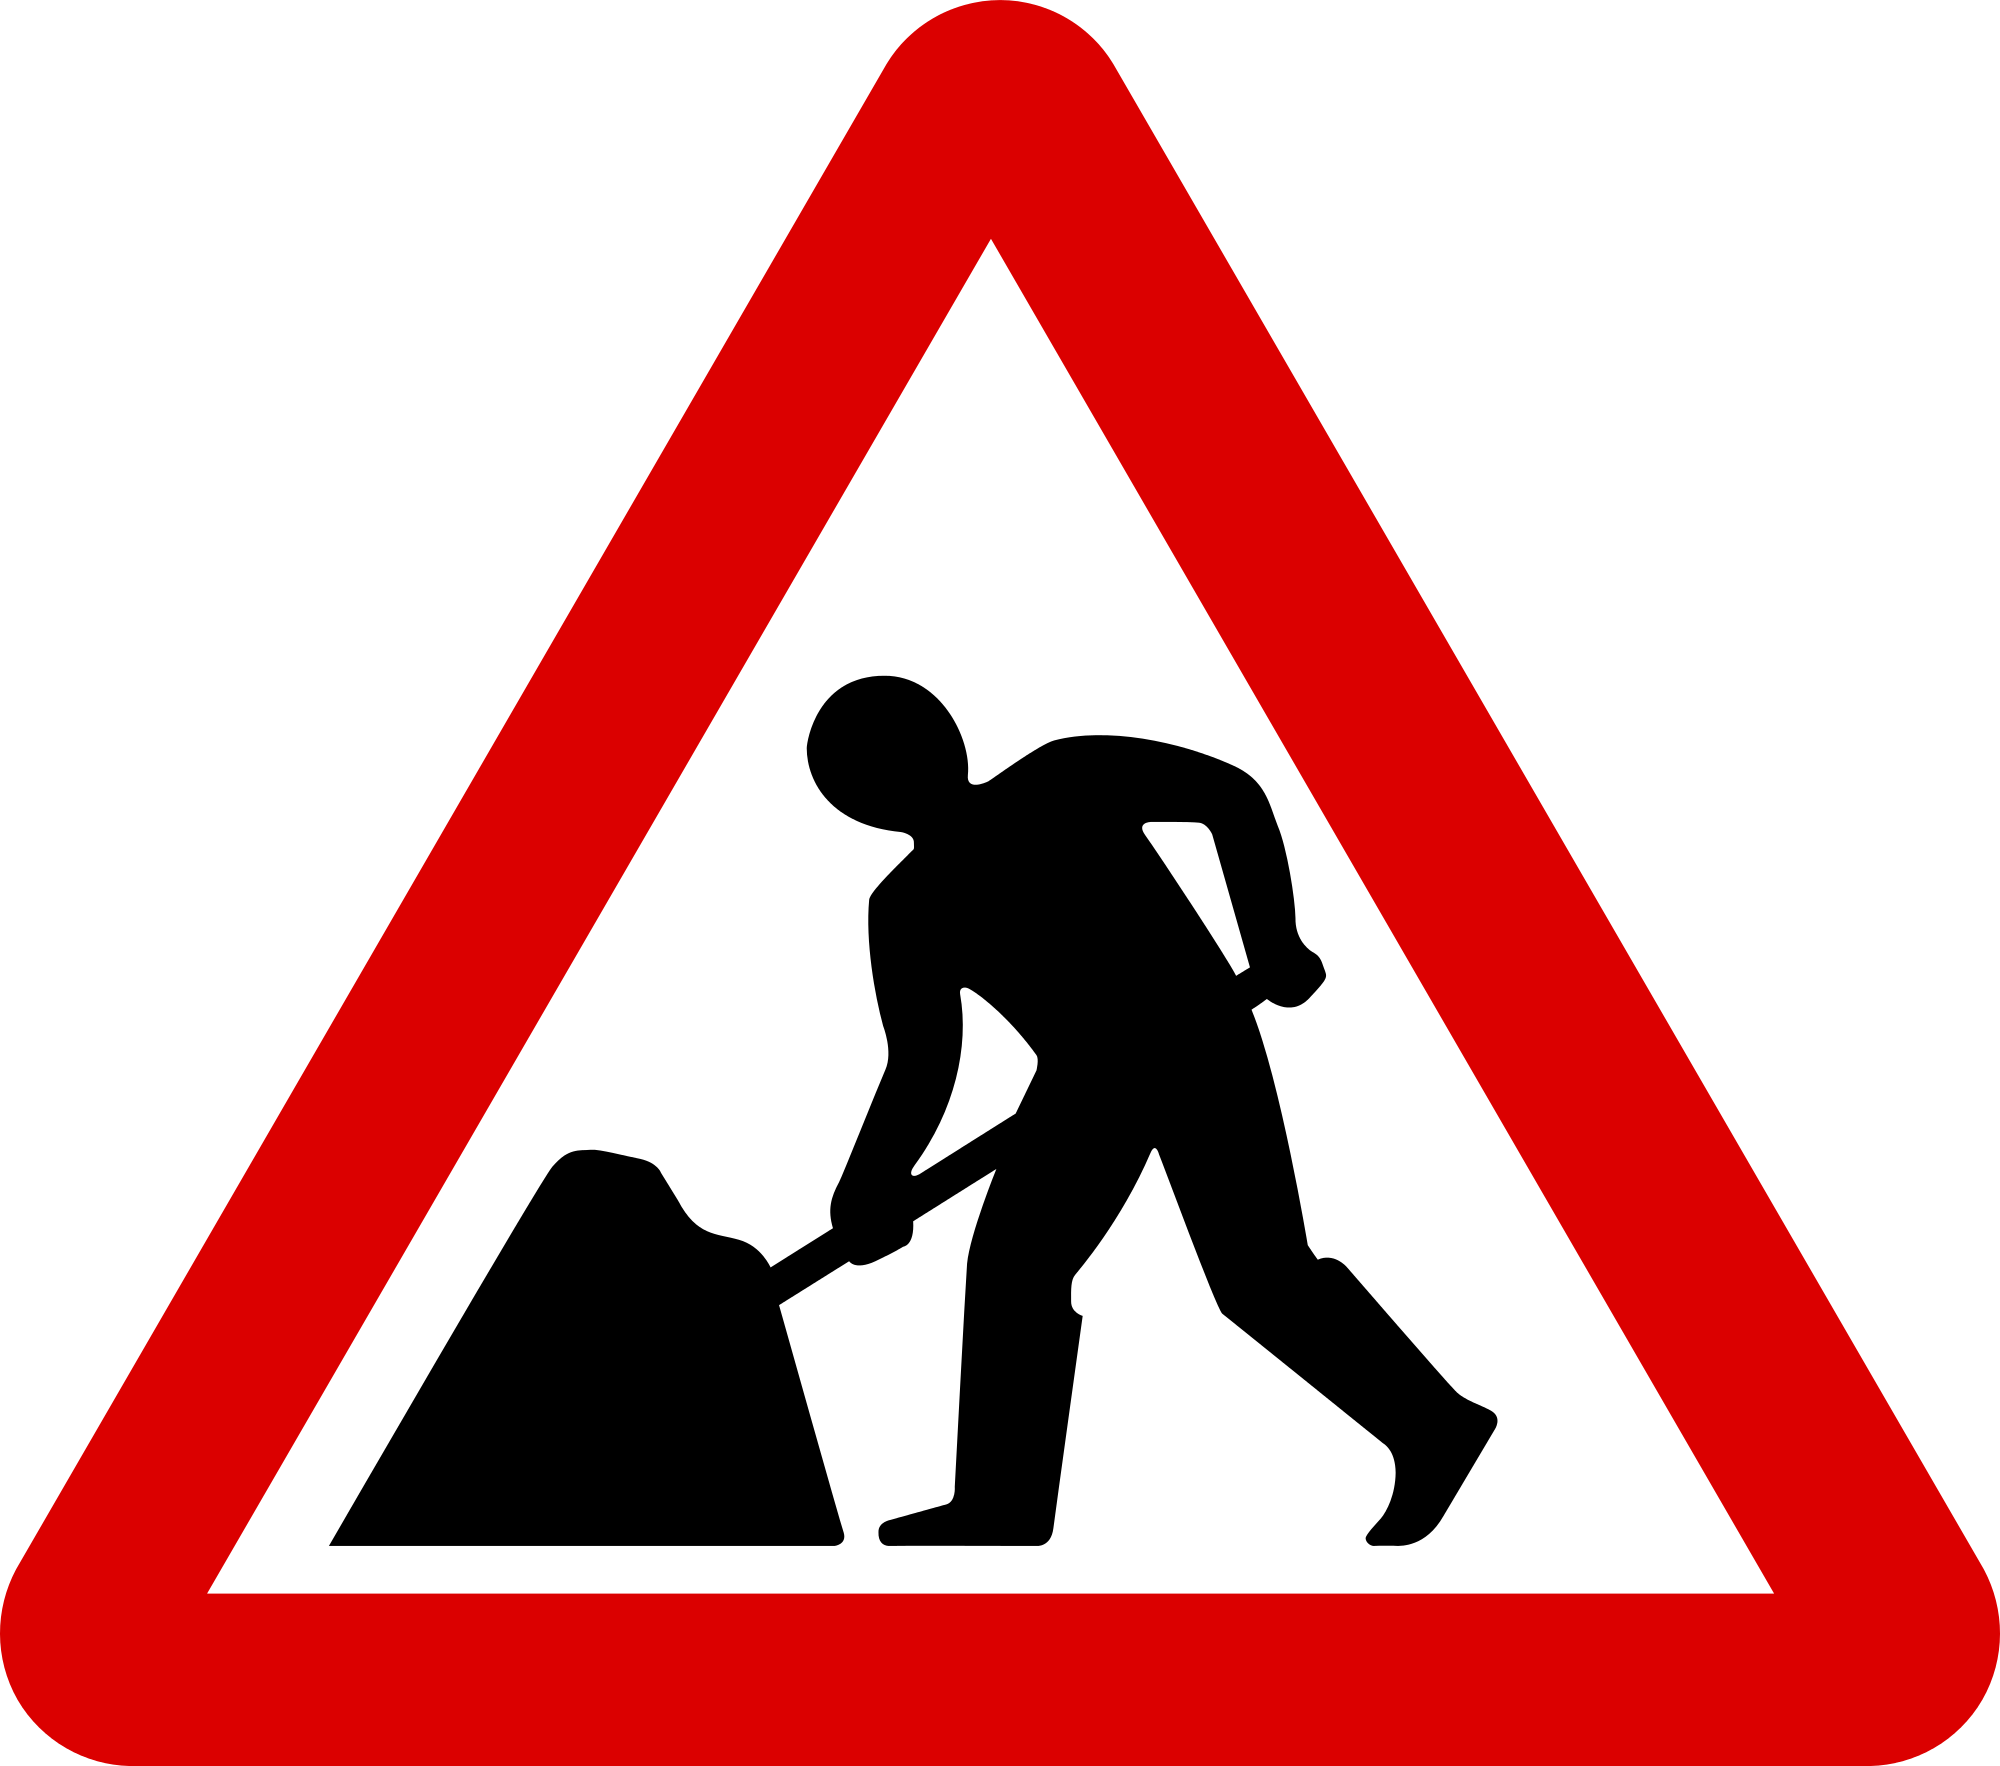 File:Mauritius Road Signs - Warning Sign - Road works.svg ...